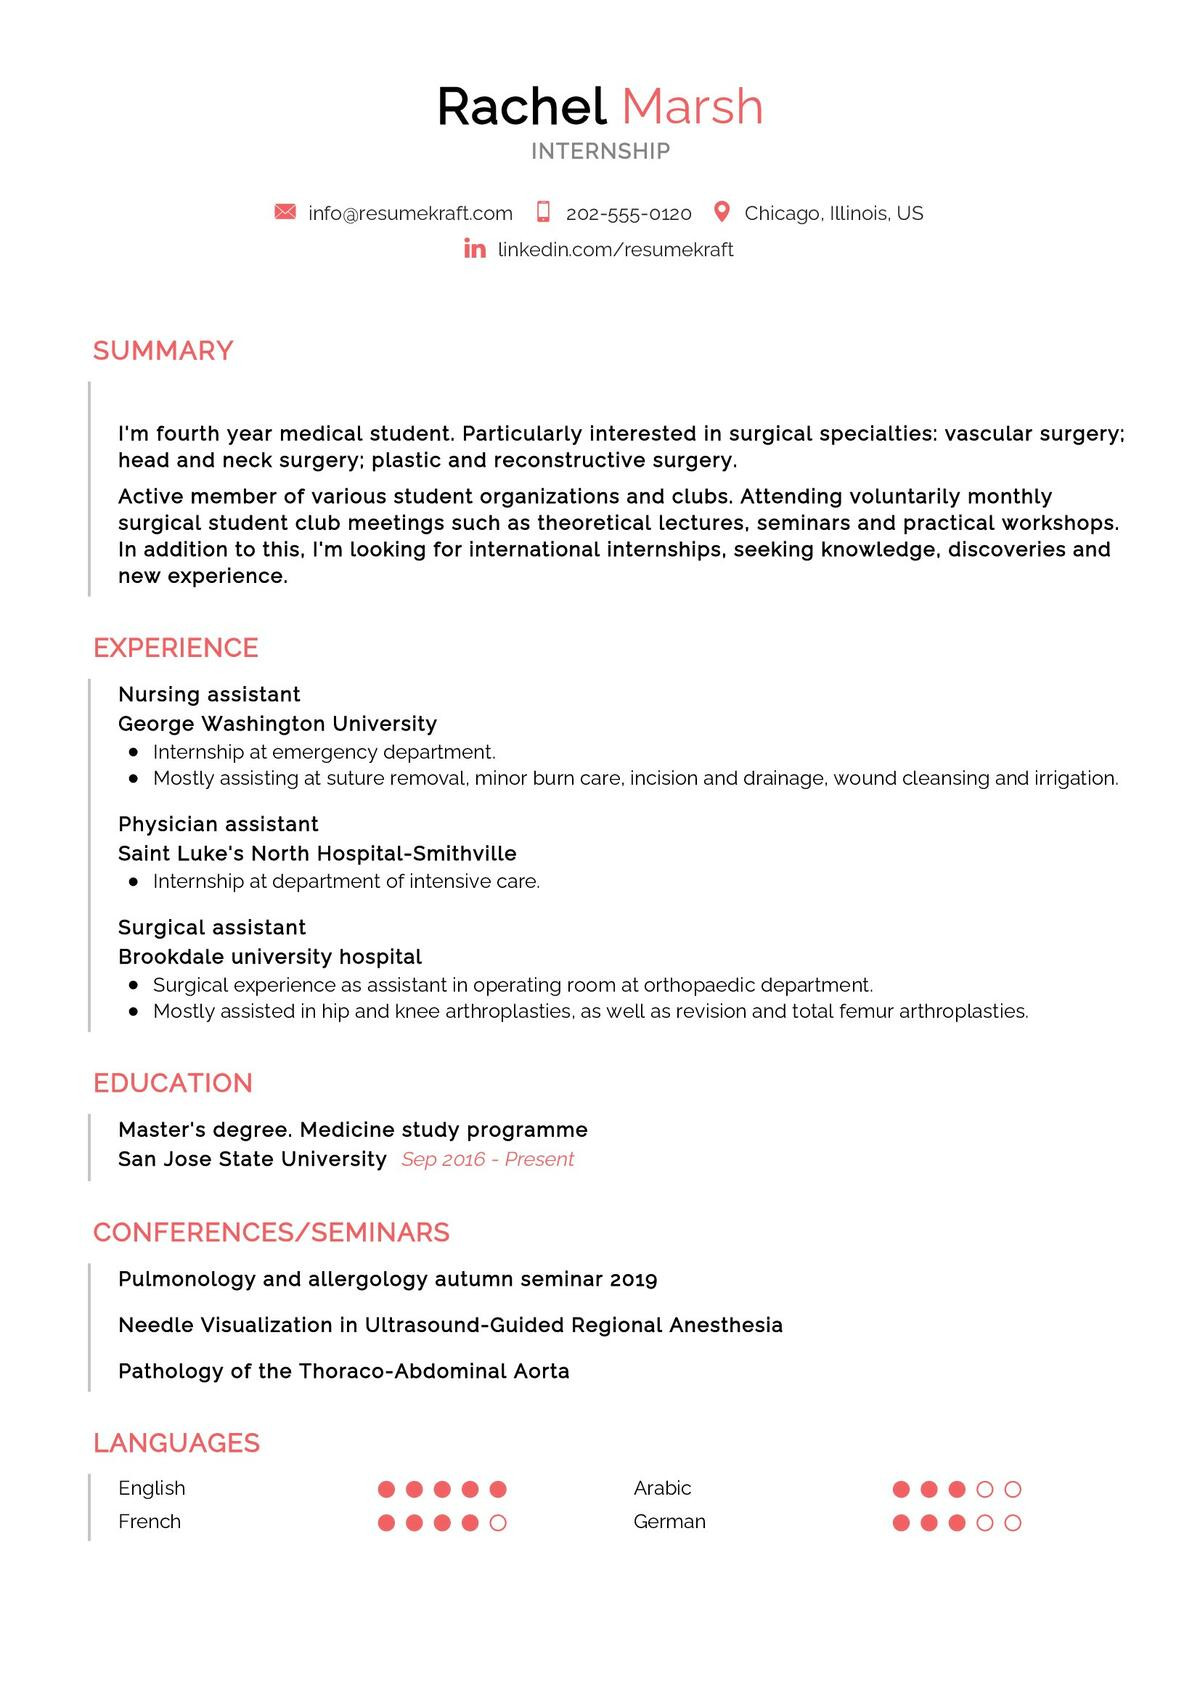 Sample Resume for Ms In Us with Work Experience Internship Resume Sample 2021 Writing Guide & Tips – Resumekraft